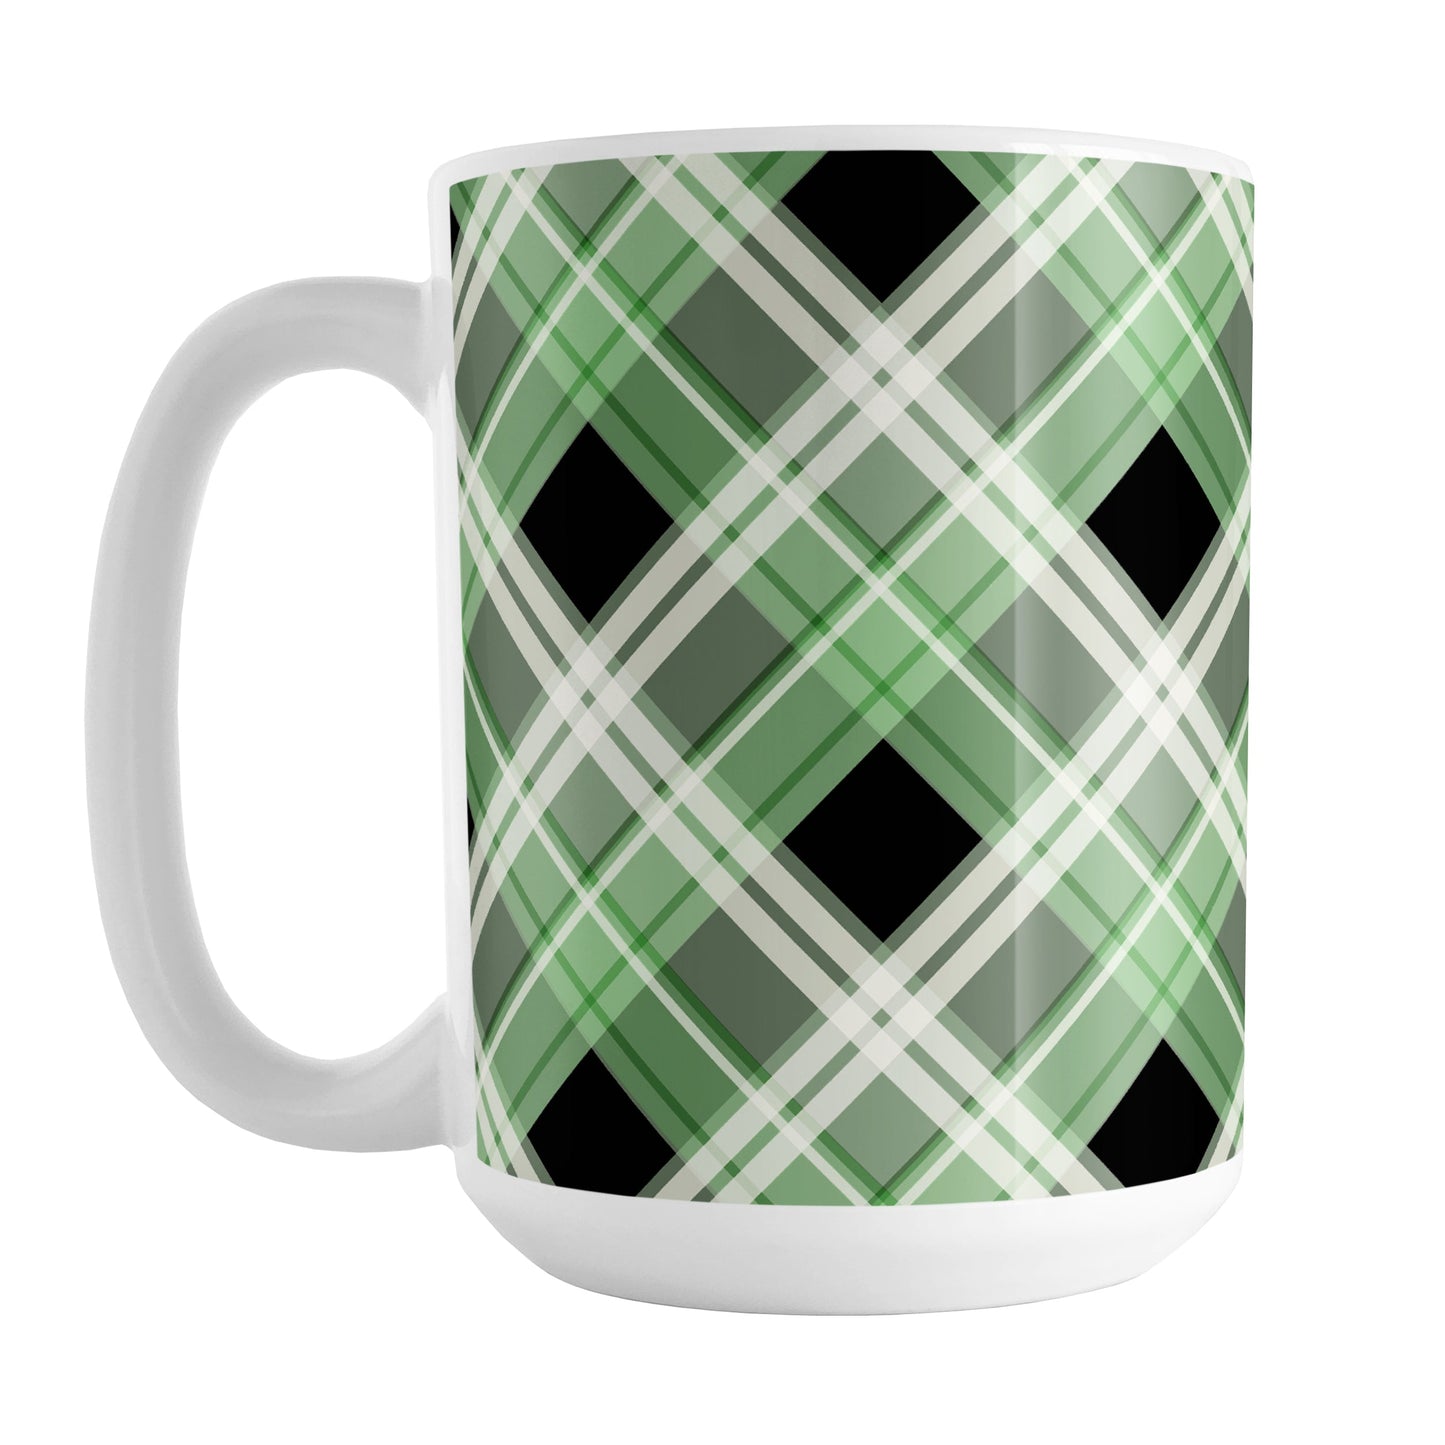 Alternative Green Plaid Mug (15oz) at Amy's Coffee Mugs. A ceramic coffee mug designed with a diagonal green, black, and white plaid pattern that wraps around the mug to the handle. Designed for someone who loves plaid patterns and is a fan of the color green.